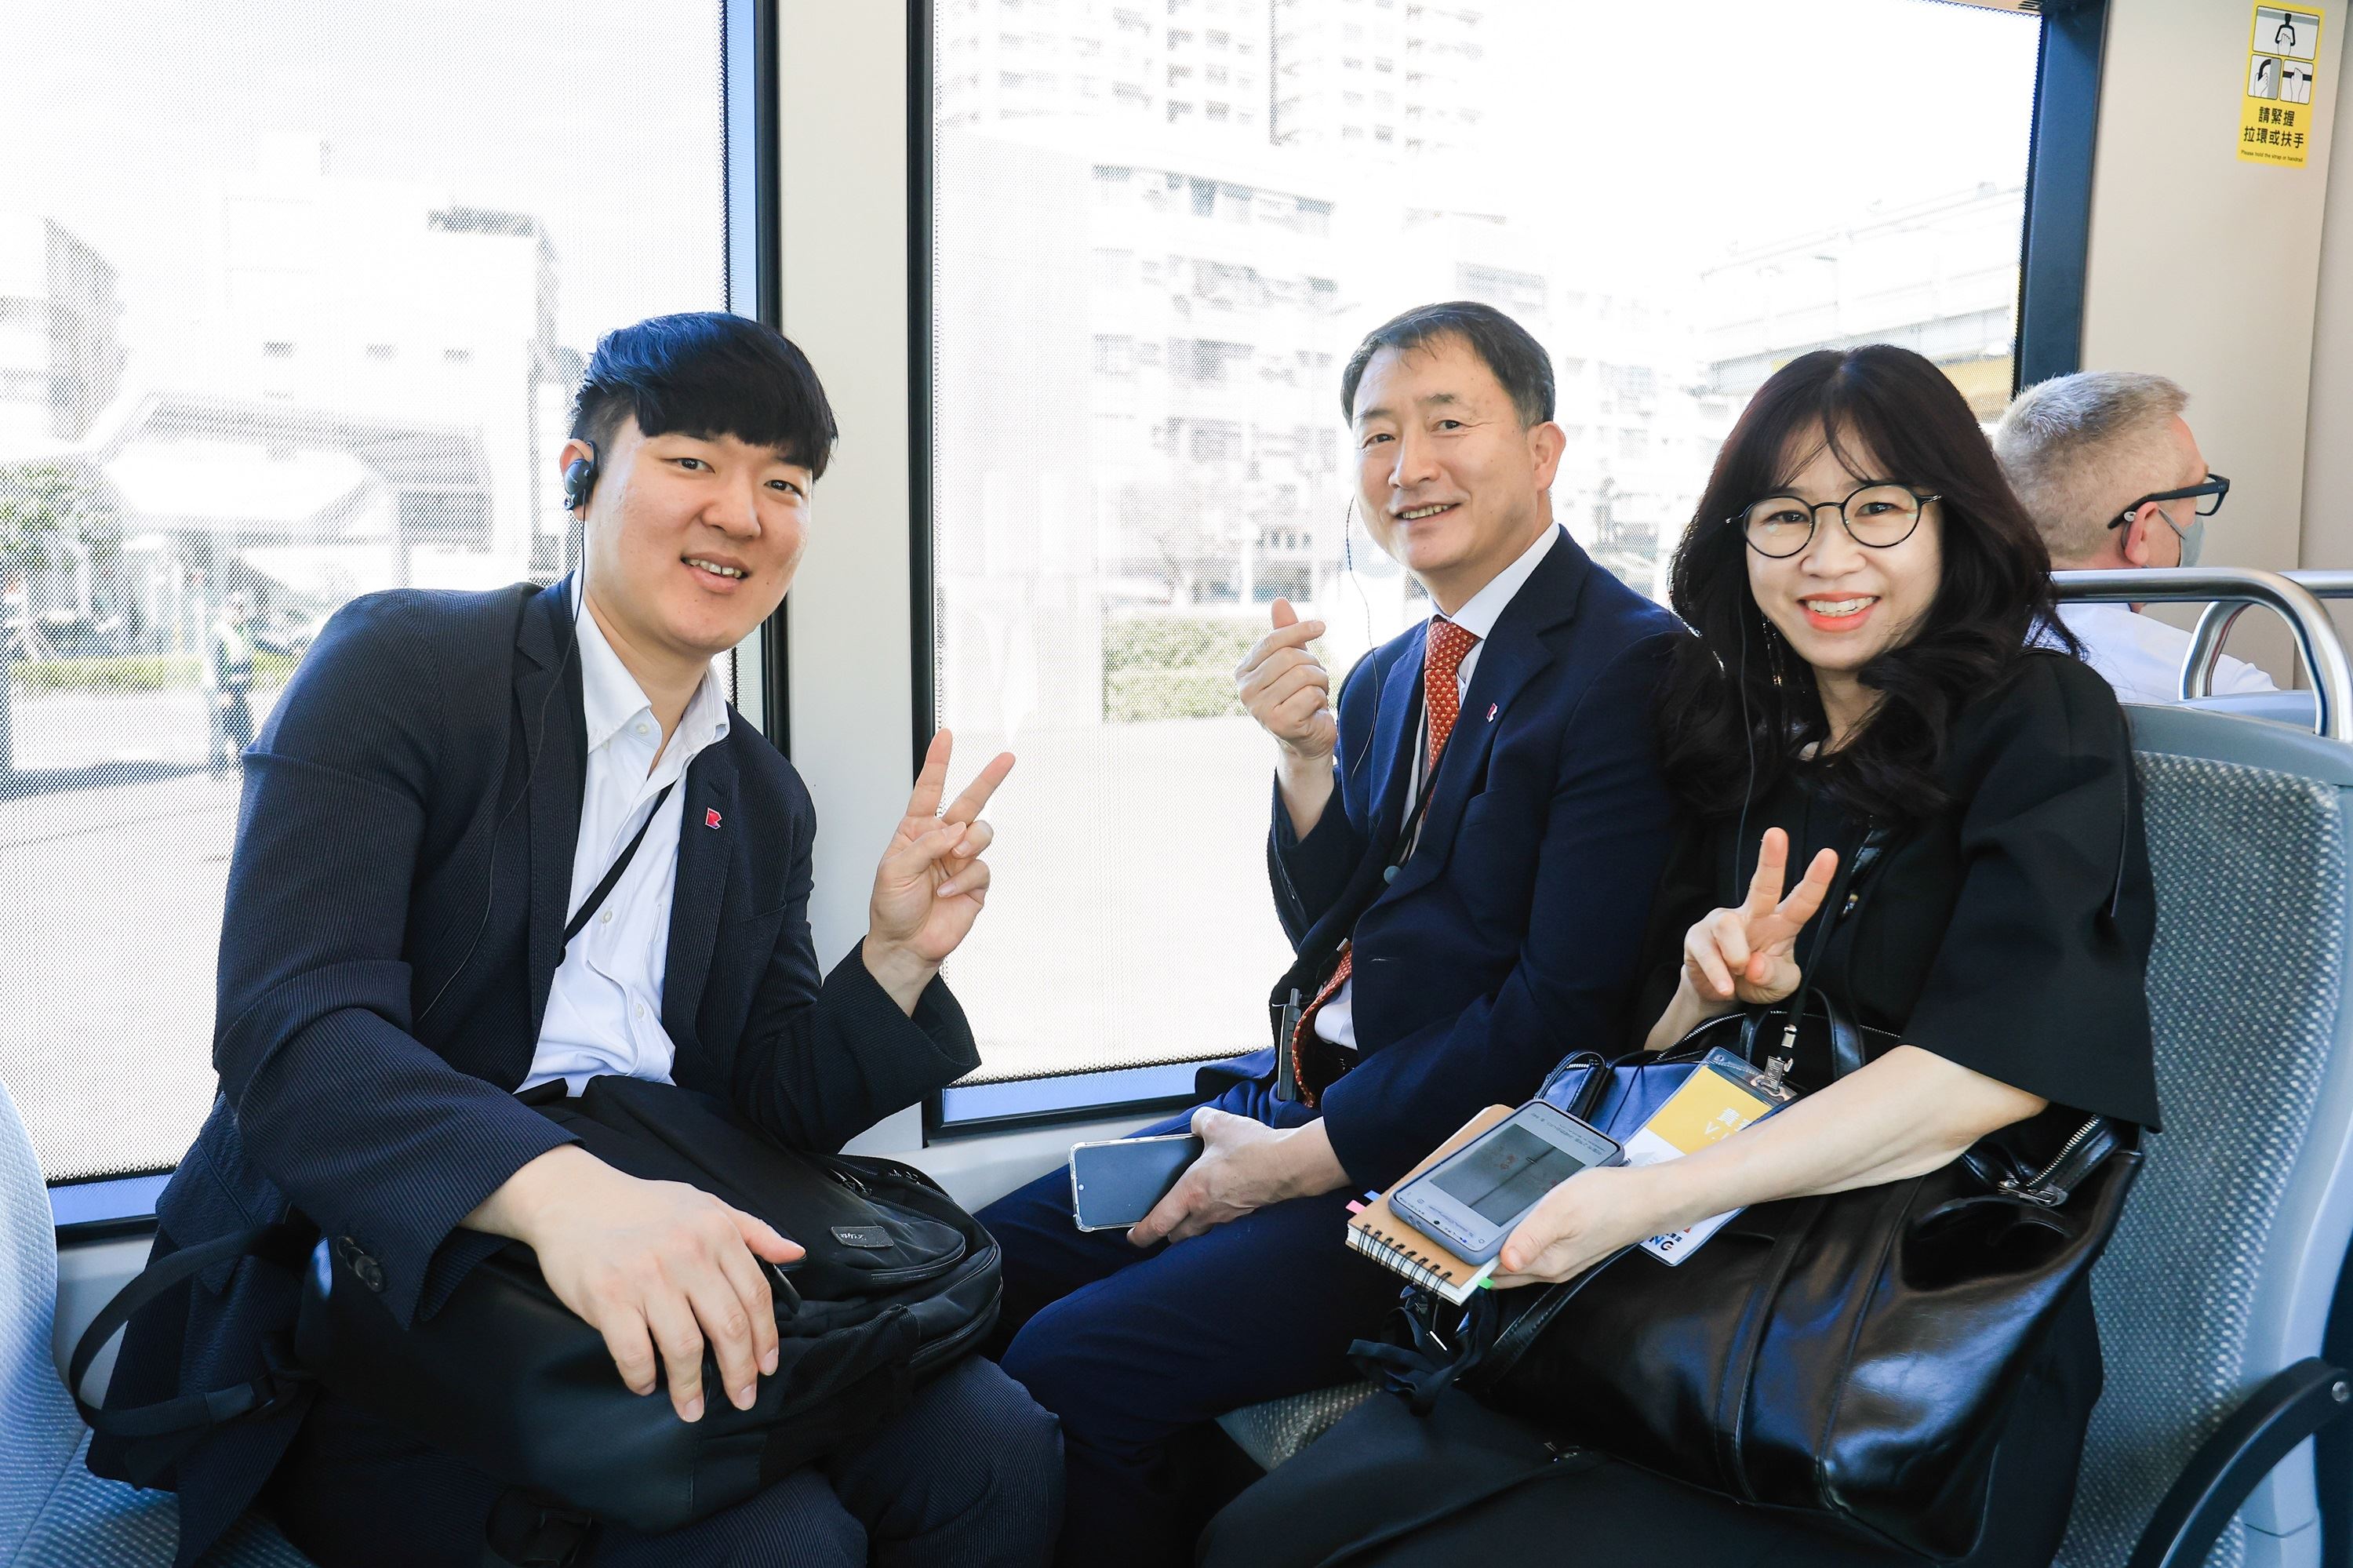 1.Representatives boarded the limited edition of Light Rail